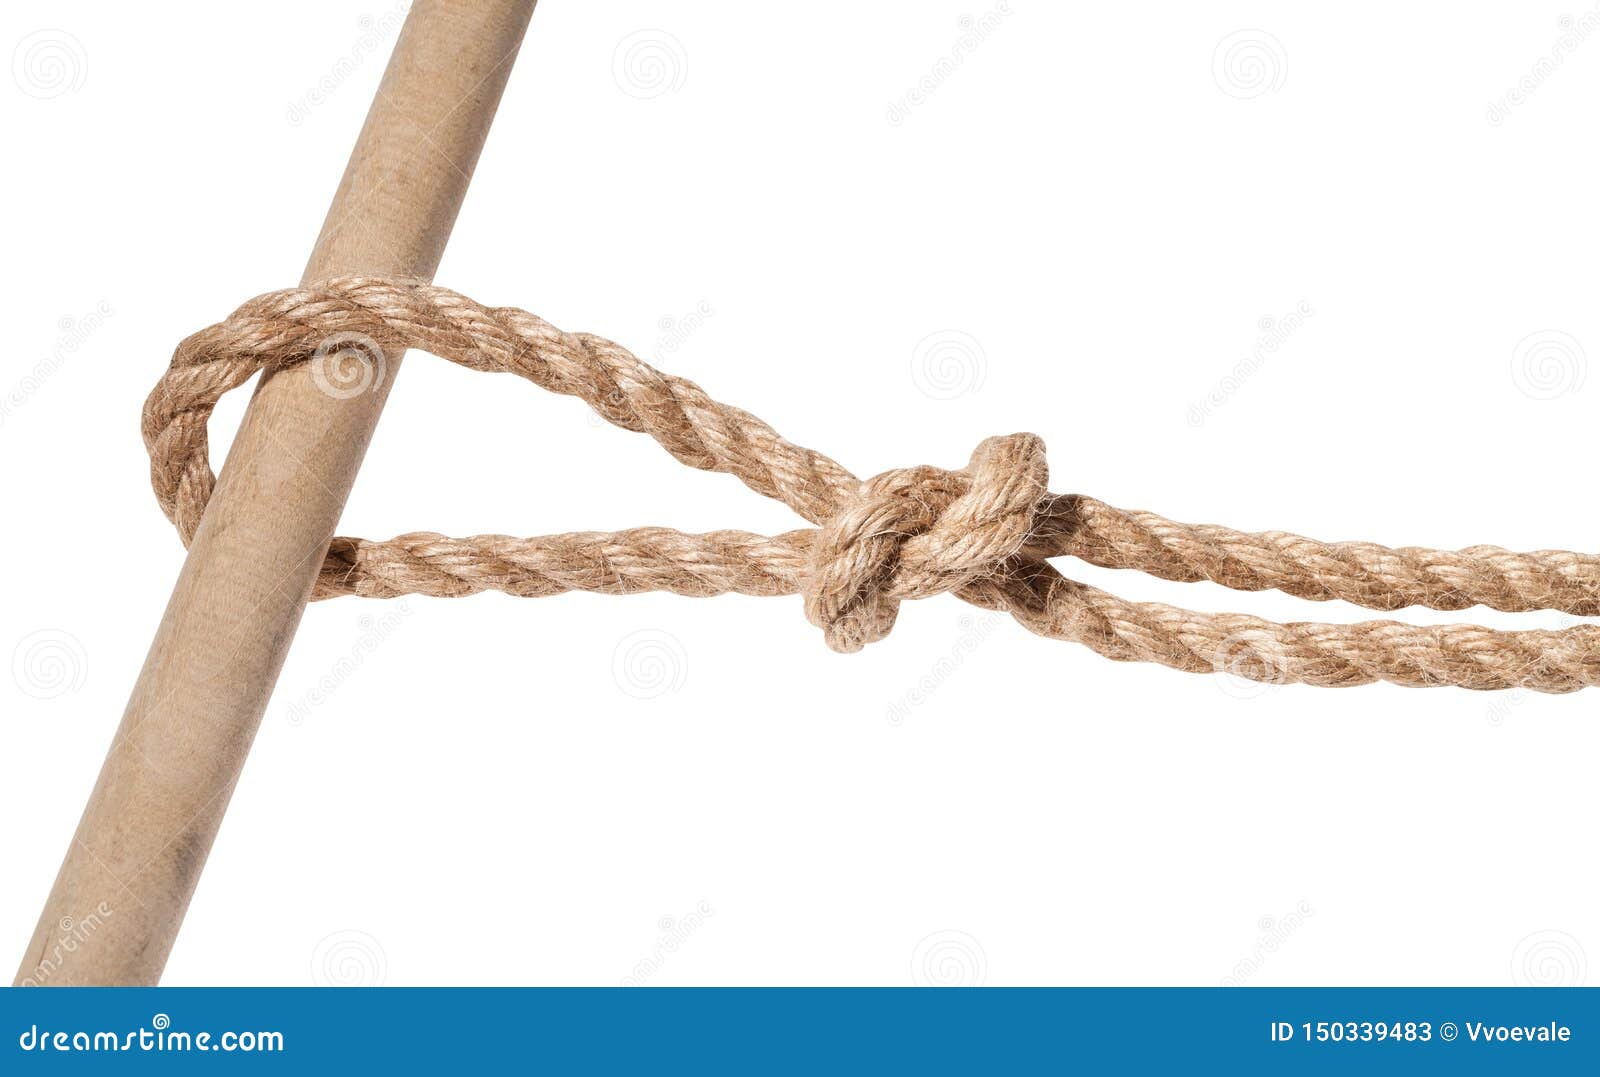 Running Knot Tied on Thick Jute Rope Isolated Stock Image - Image